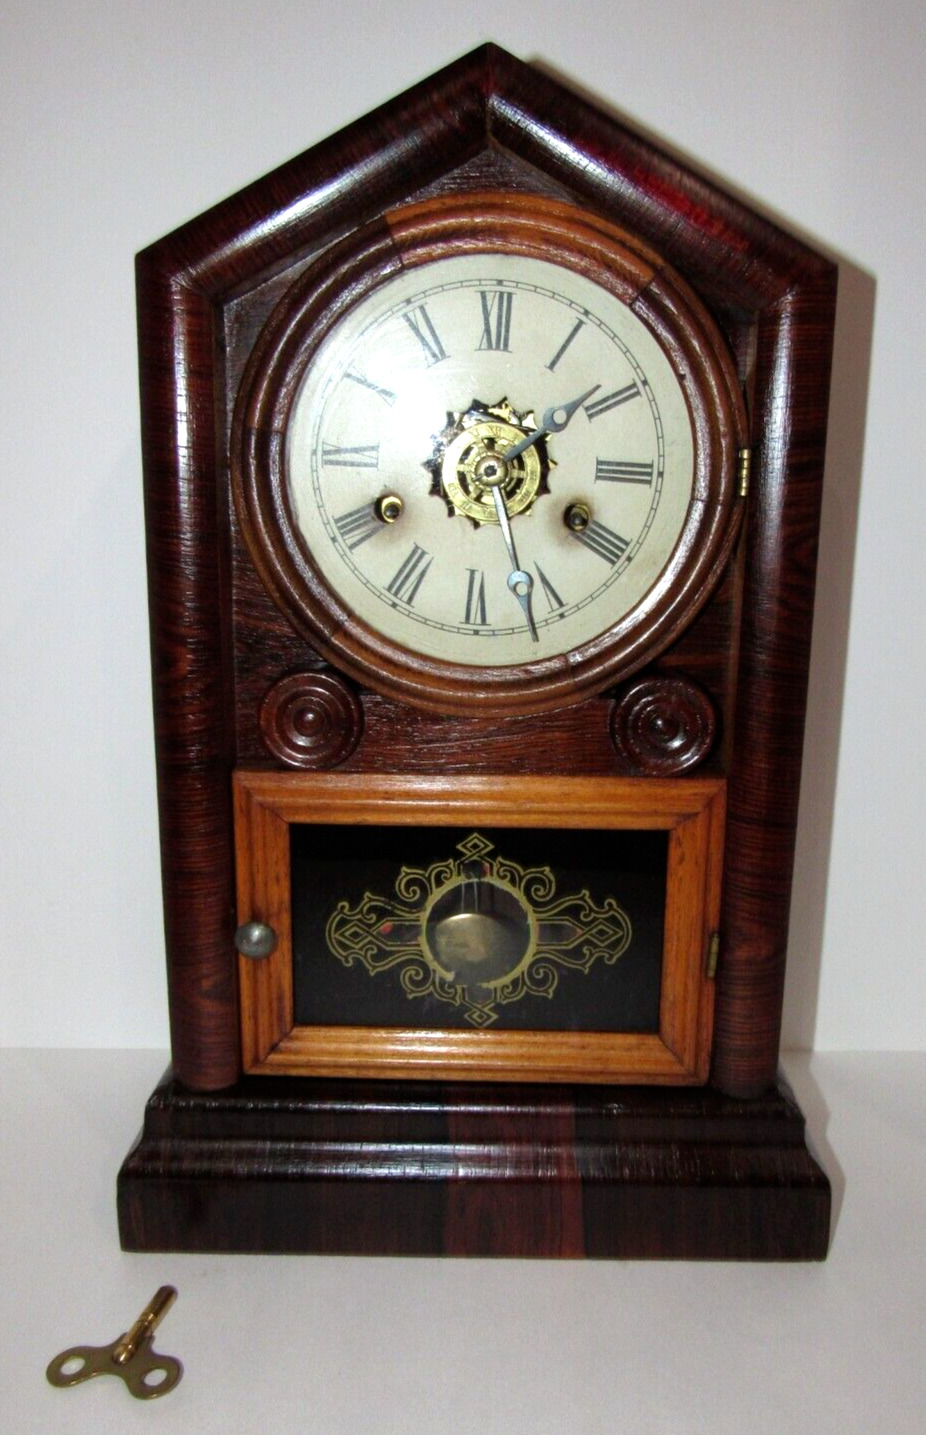 Antique Gilbert Mantel Clock with Alarm 30-Hour, Time/Strike